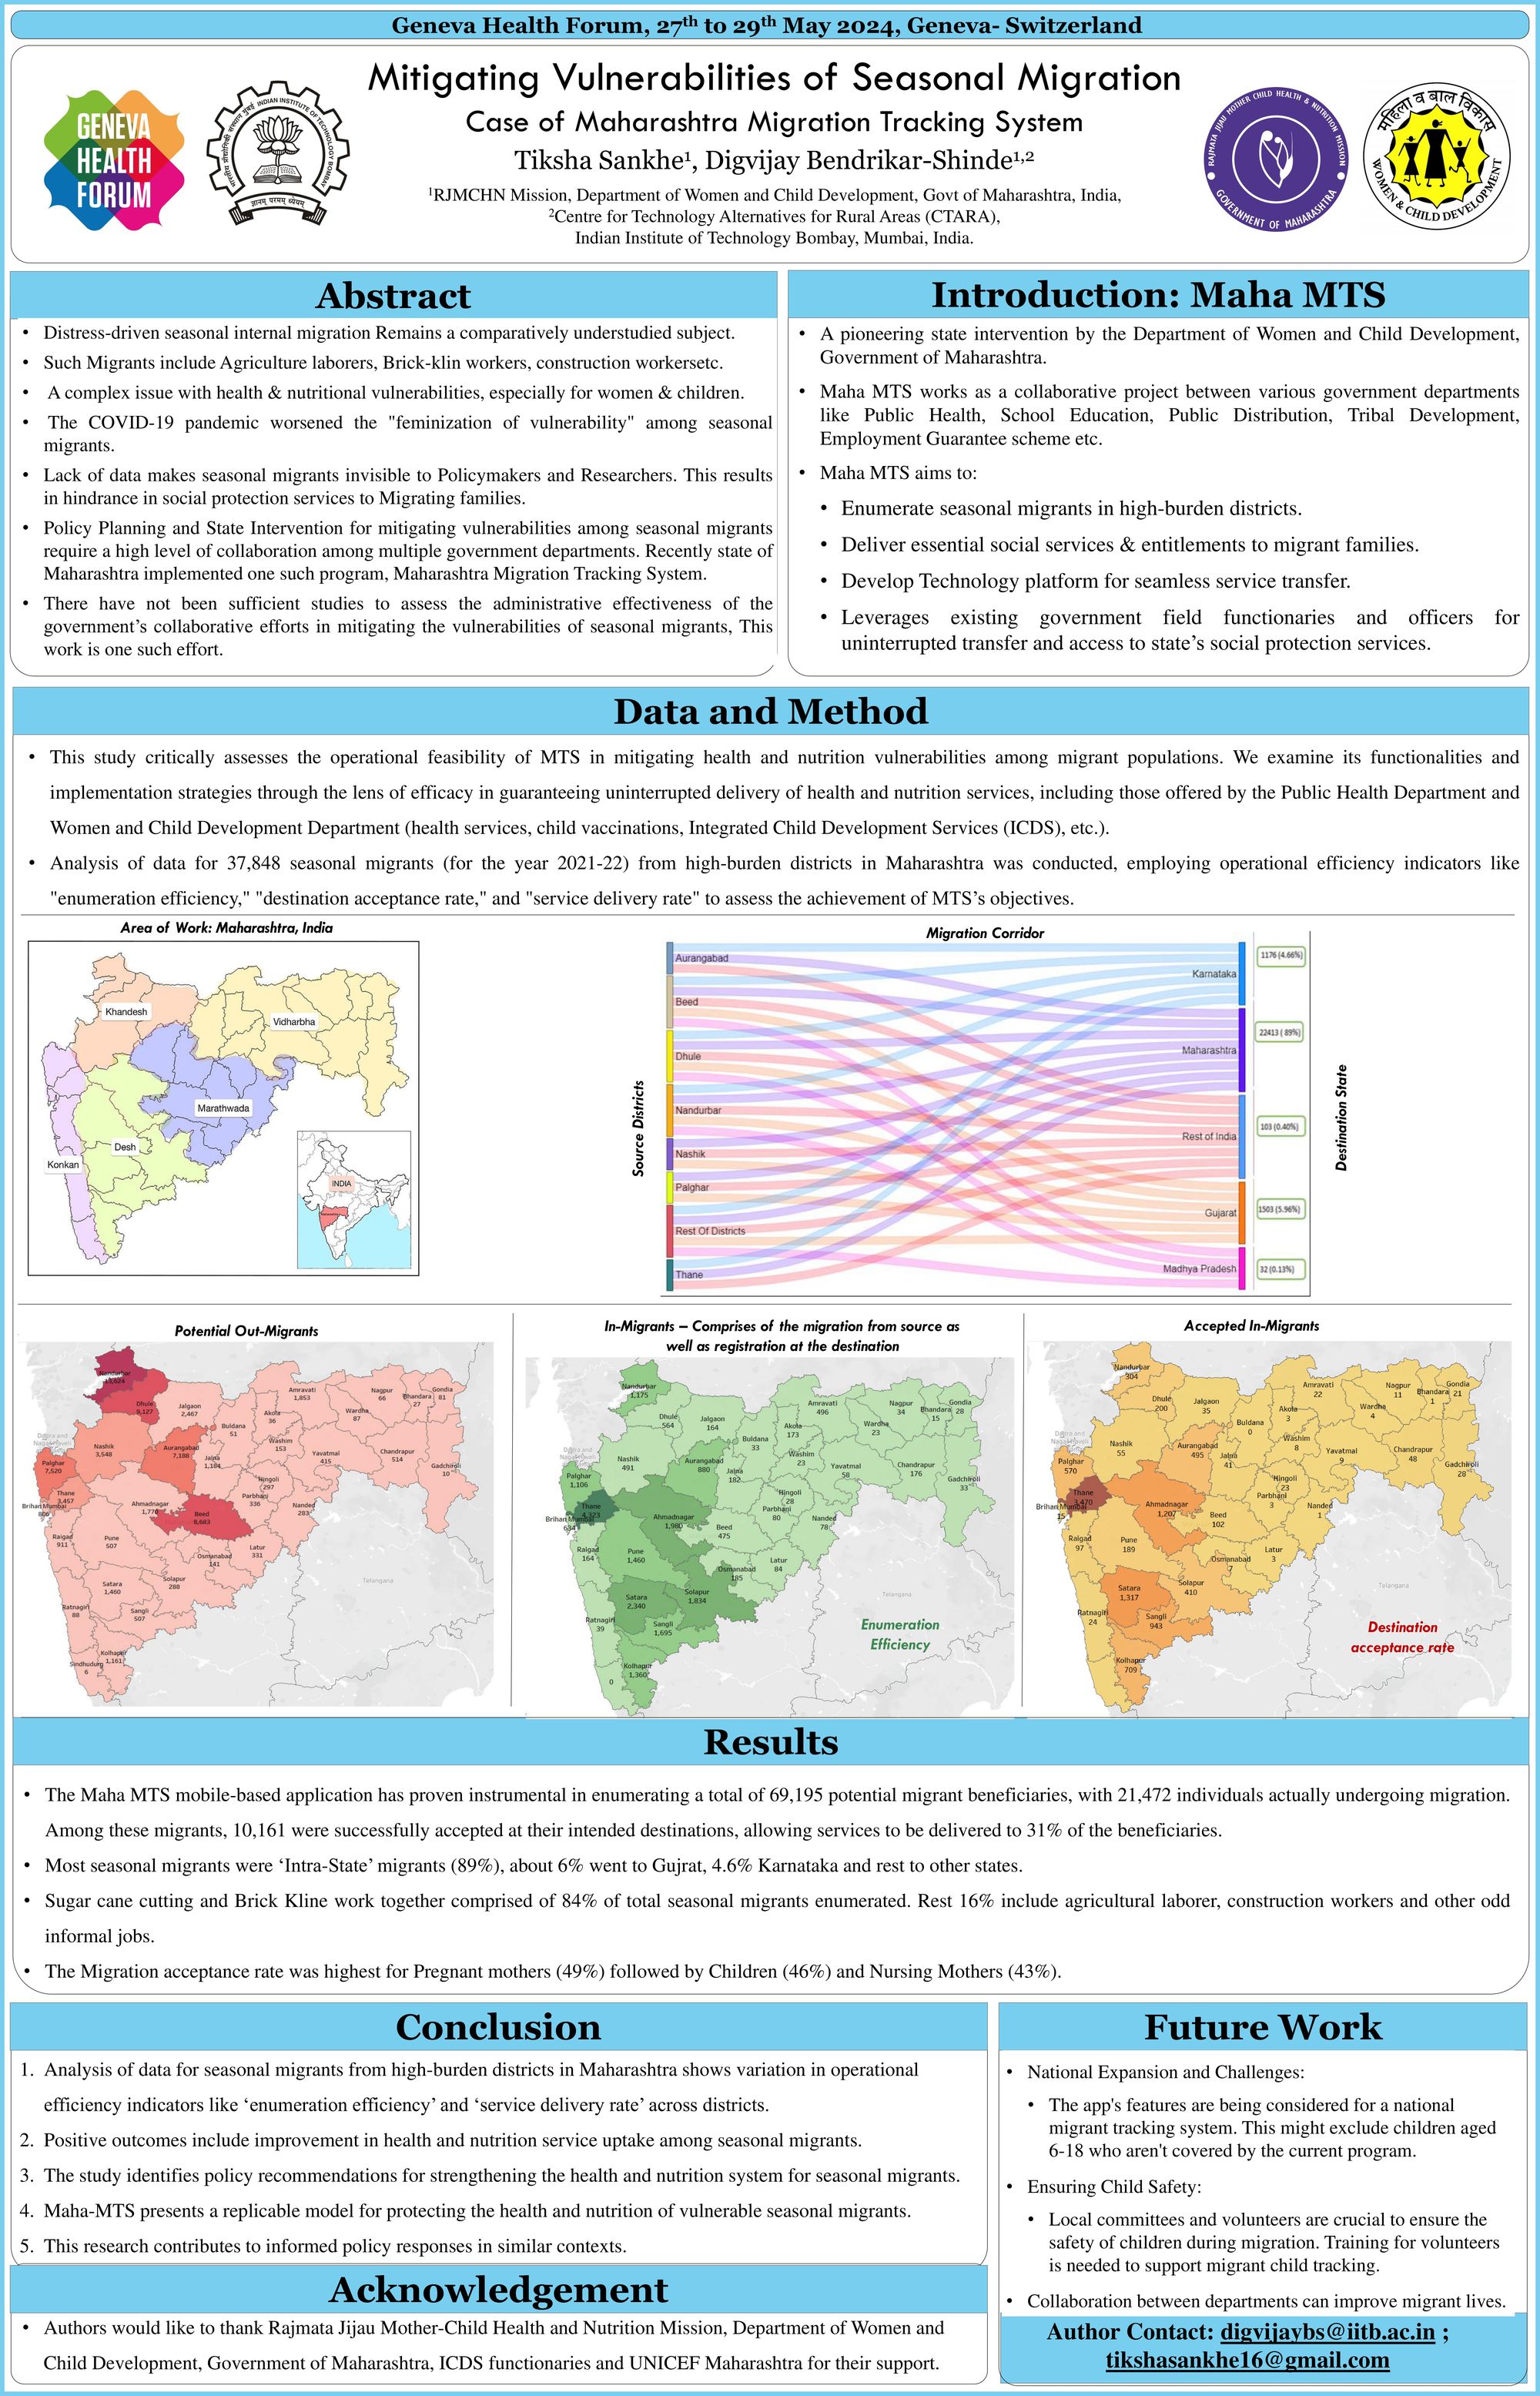 Mitigating Vulnerabilities in Distress-Driven Seasonal Migration: The Case of Maharashtra Migration Tracking System